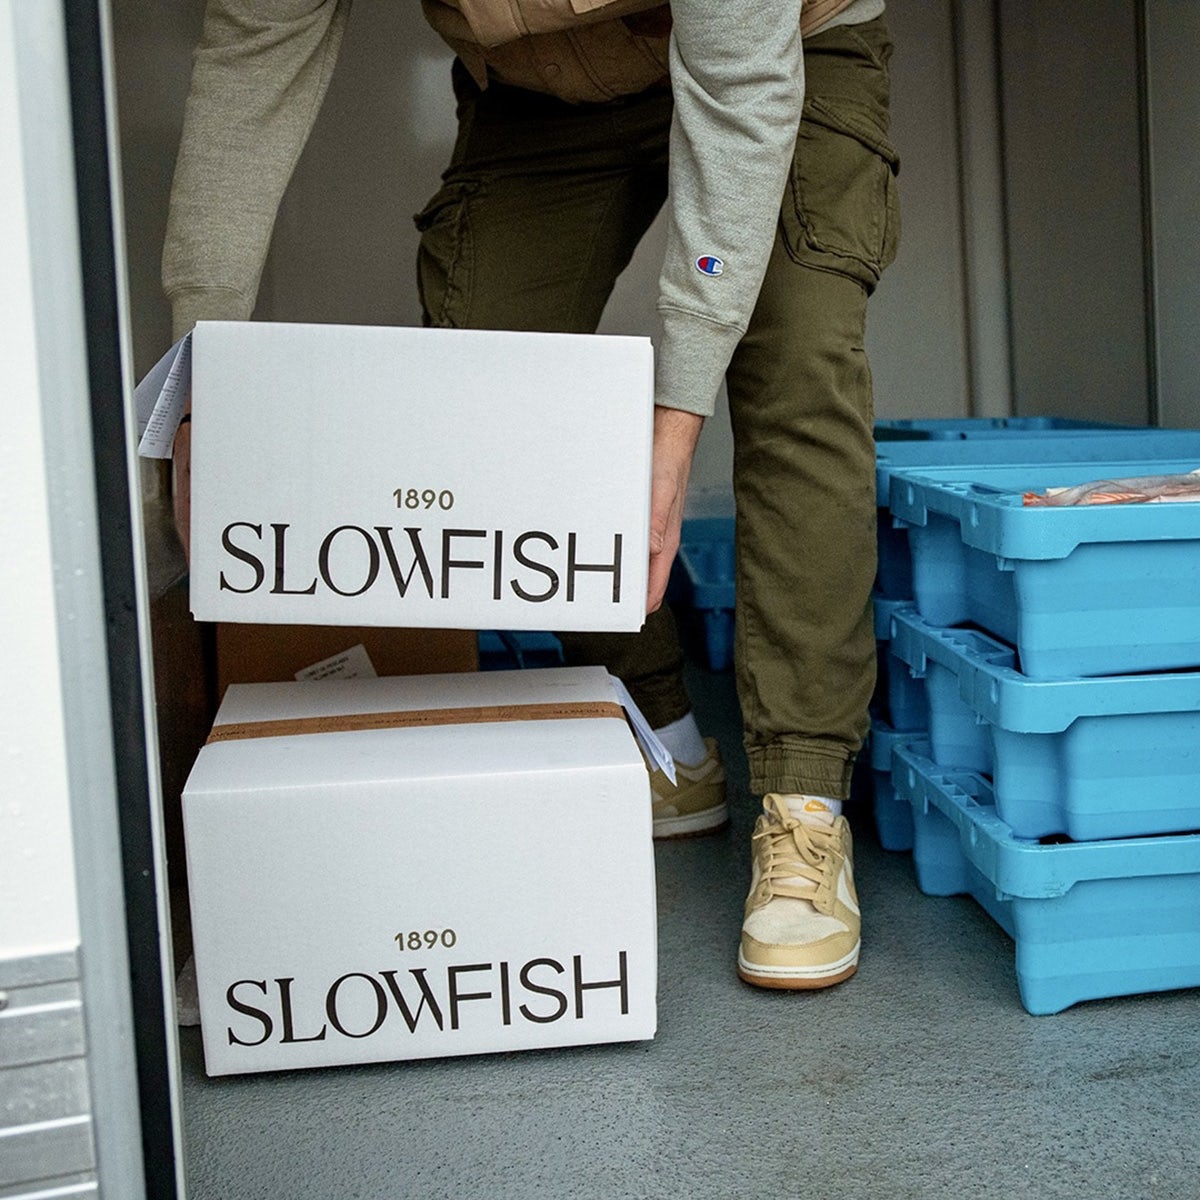 Photograph of a person unloading boxes in a van featuring the Slowfish branding by Vasava on the side